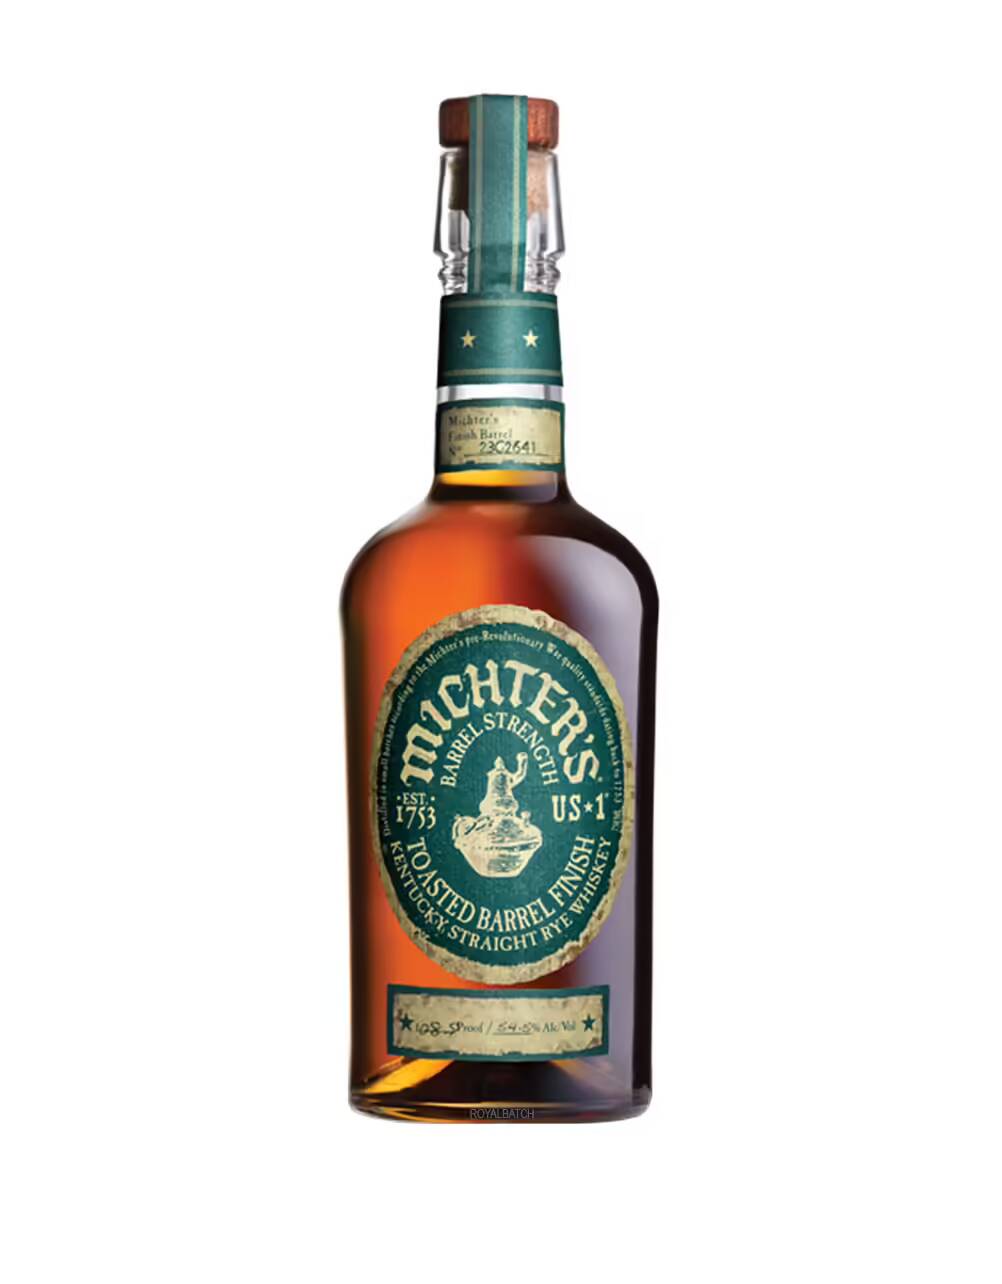 Michters Toasted Barrel Finish Strength Rye Whiskey